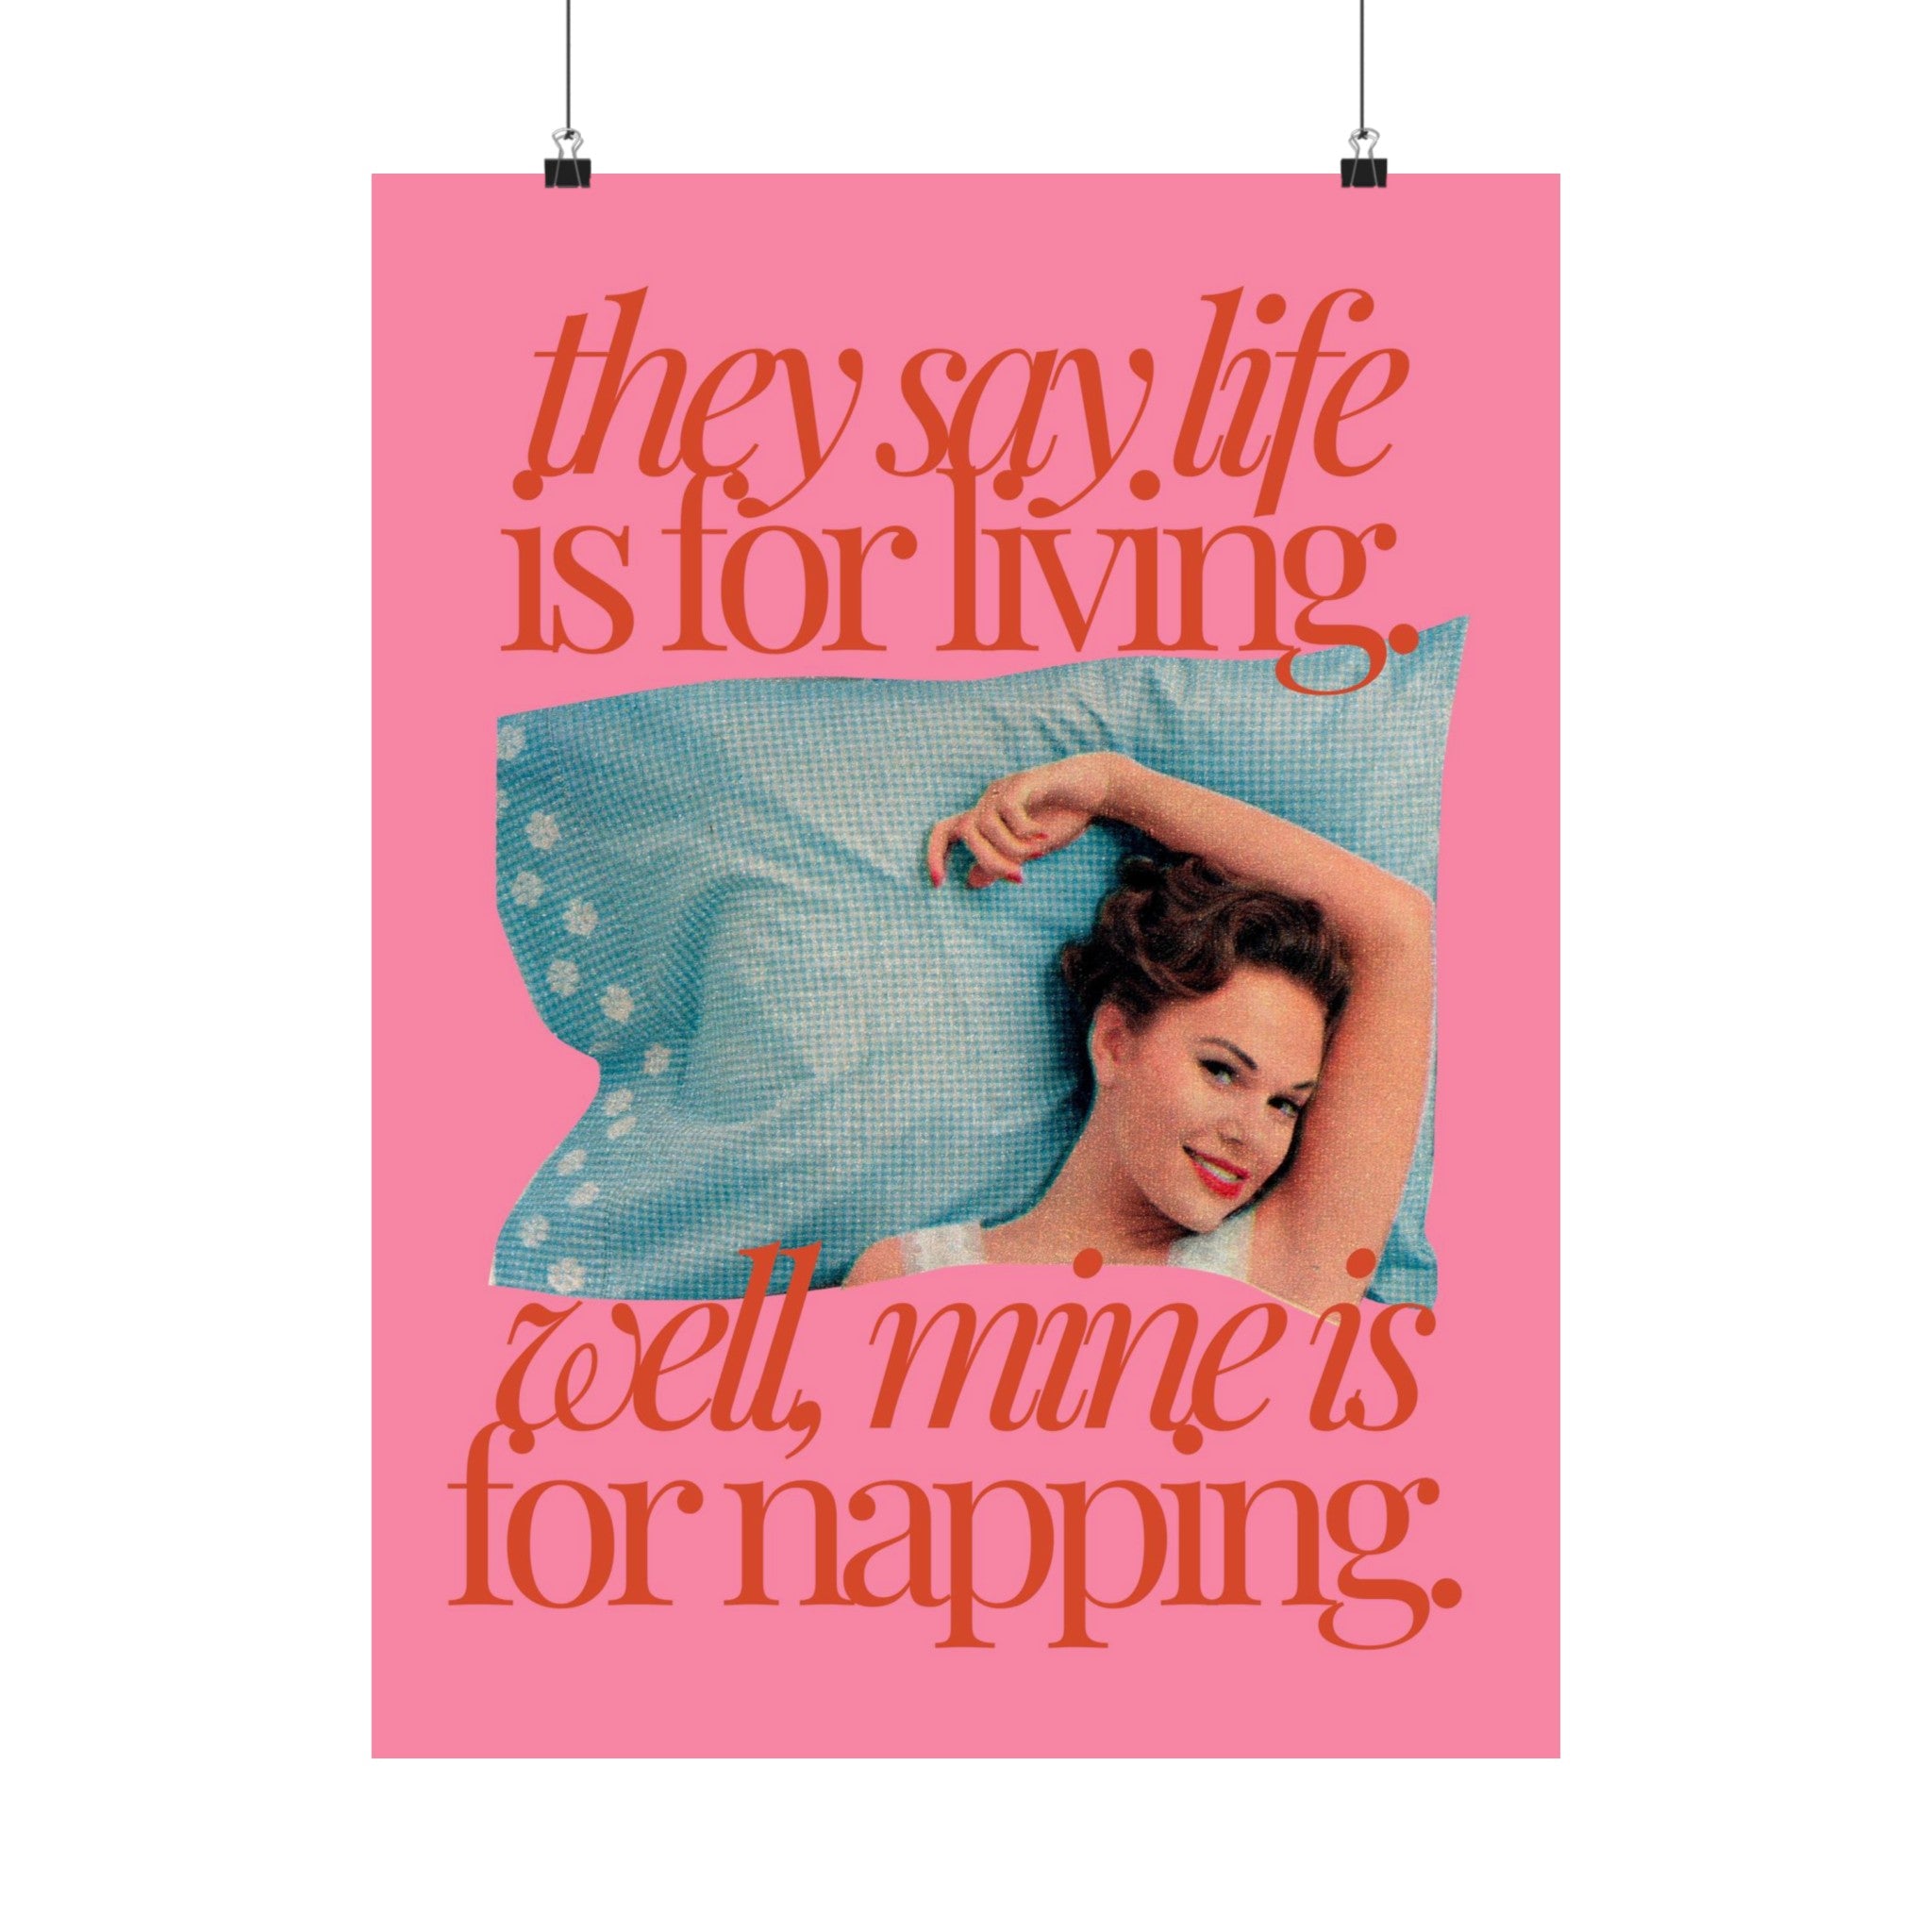 Life is For Napping Physical Poster